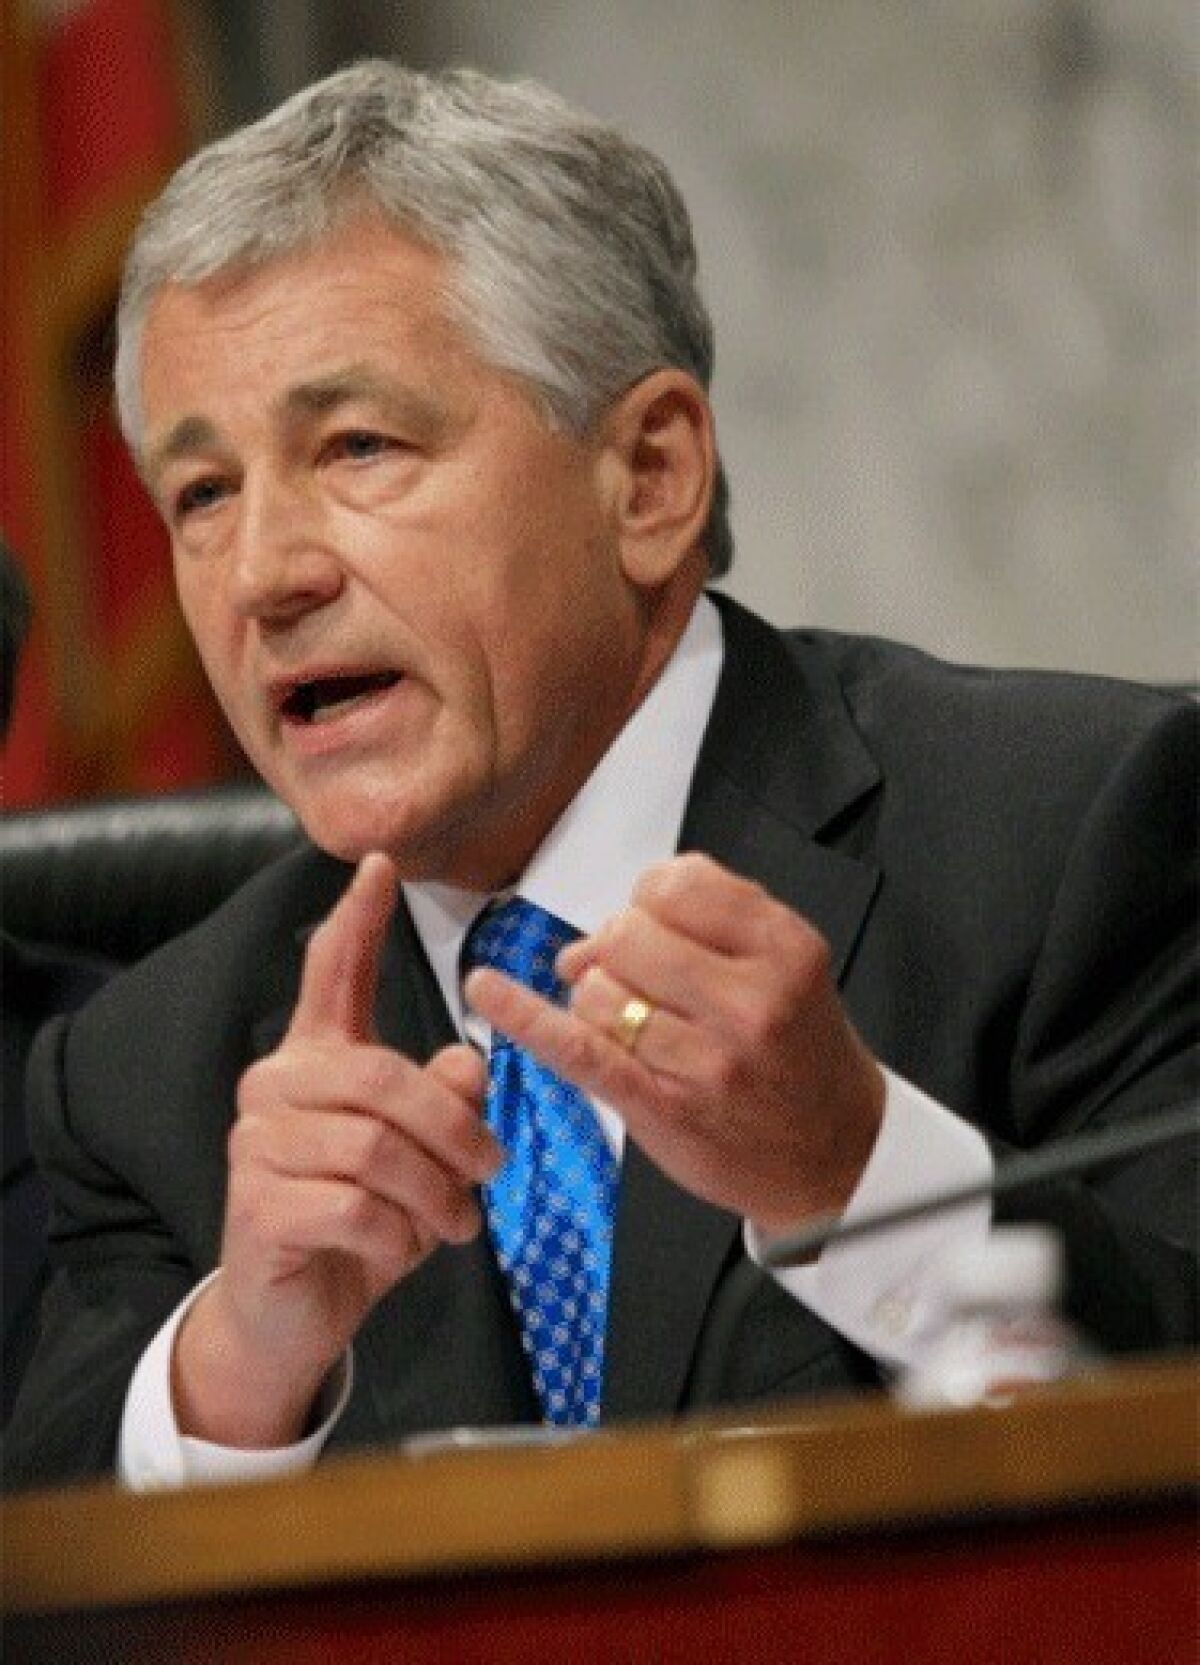 Former Sen. Chuck Hagel (R-Neb.) is seen speaking during a hearing held by the Senate Foreign Relations Committee on Capitol Hill in Washington, D.C.